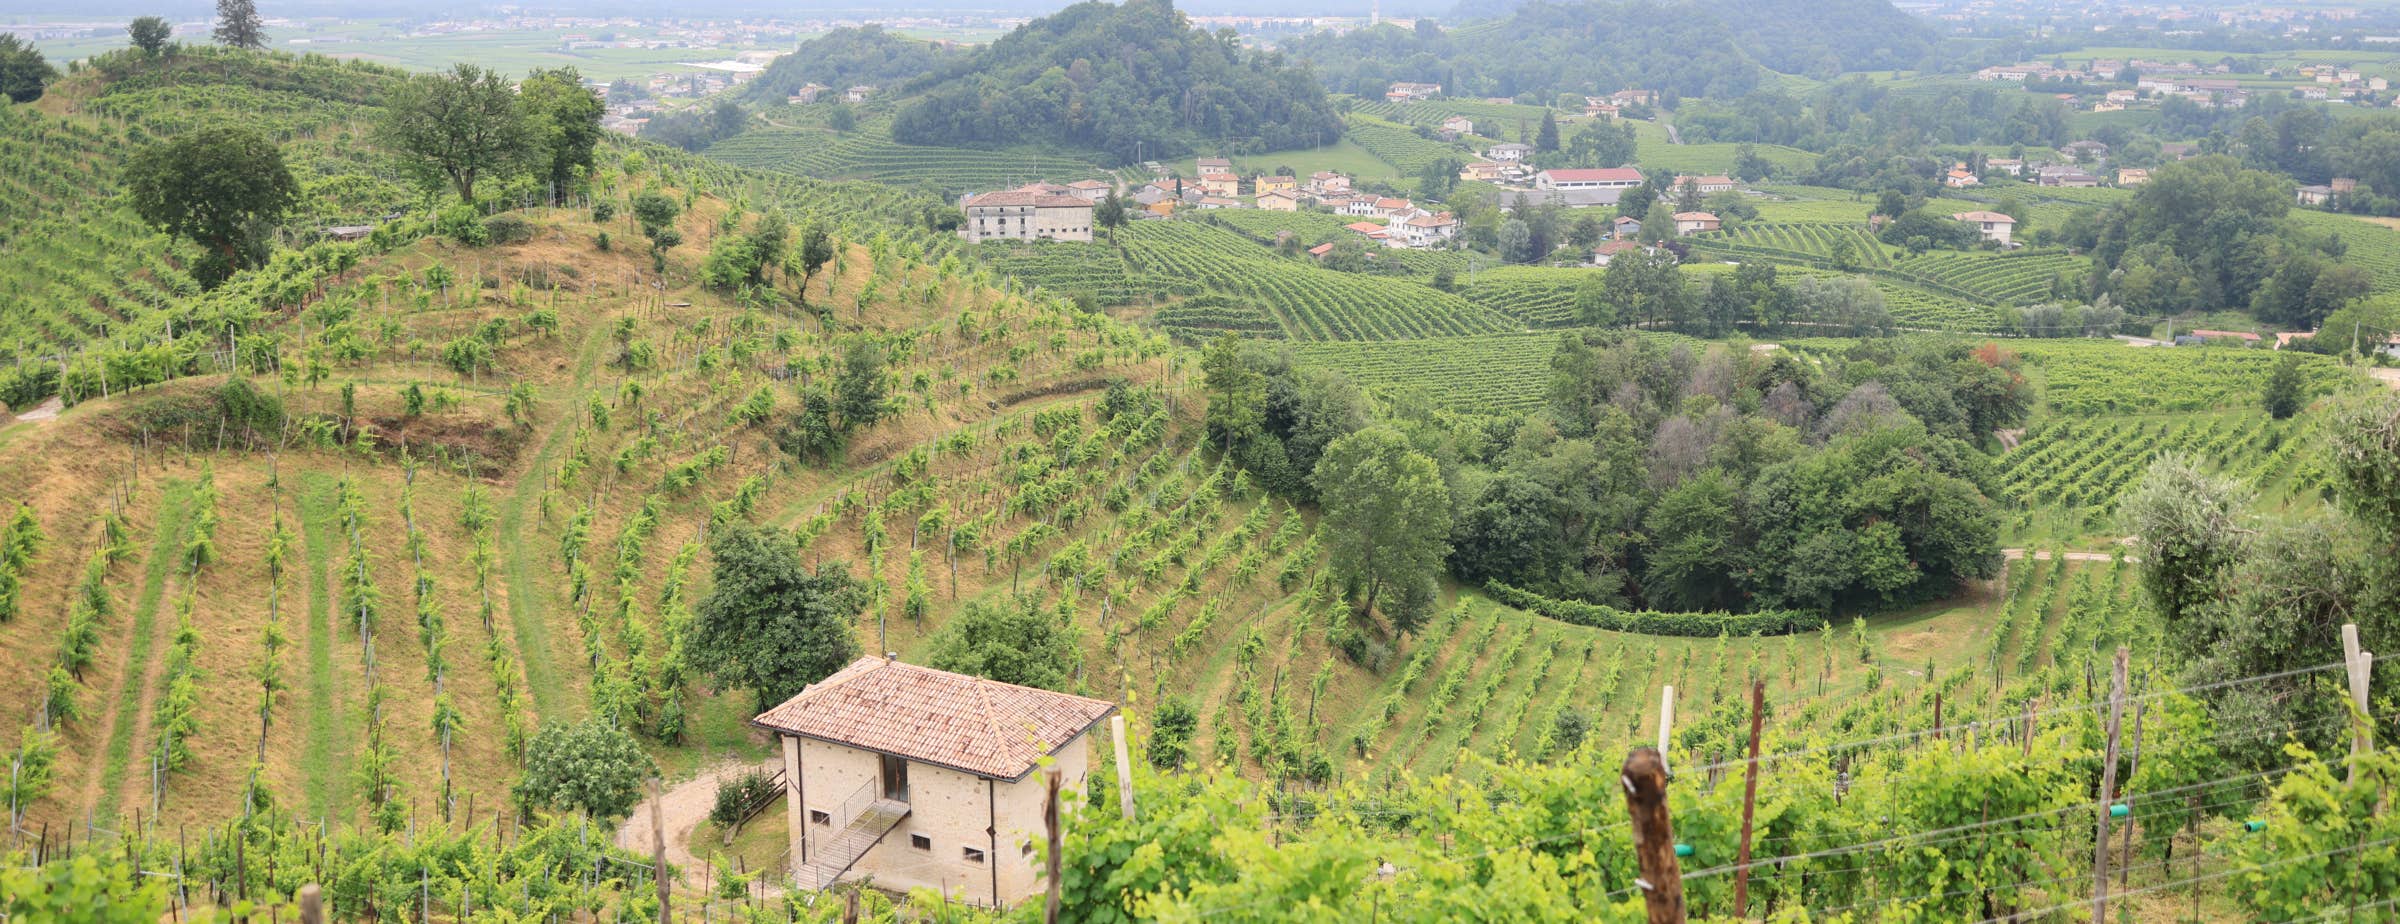 The image shows vineyards on hilly grounds with isolated cottages and small groups of building between vineyard parcels.